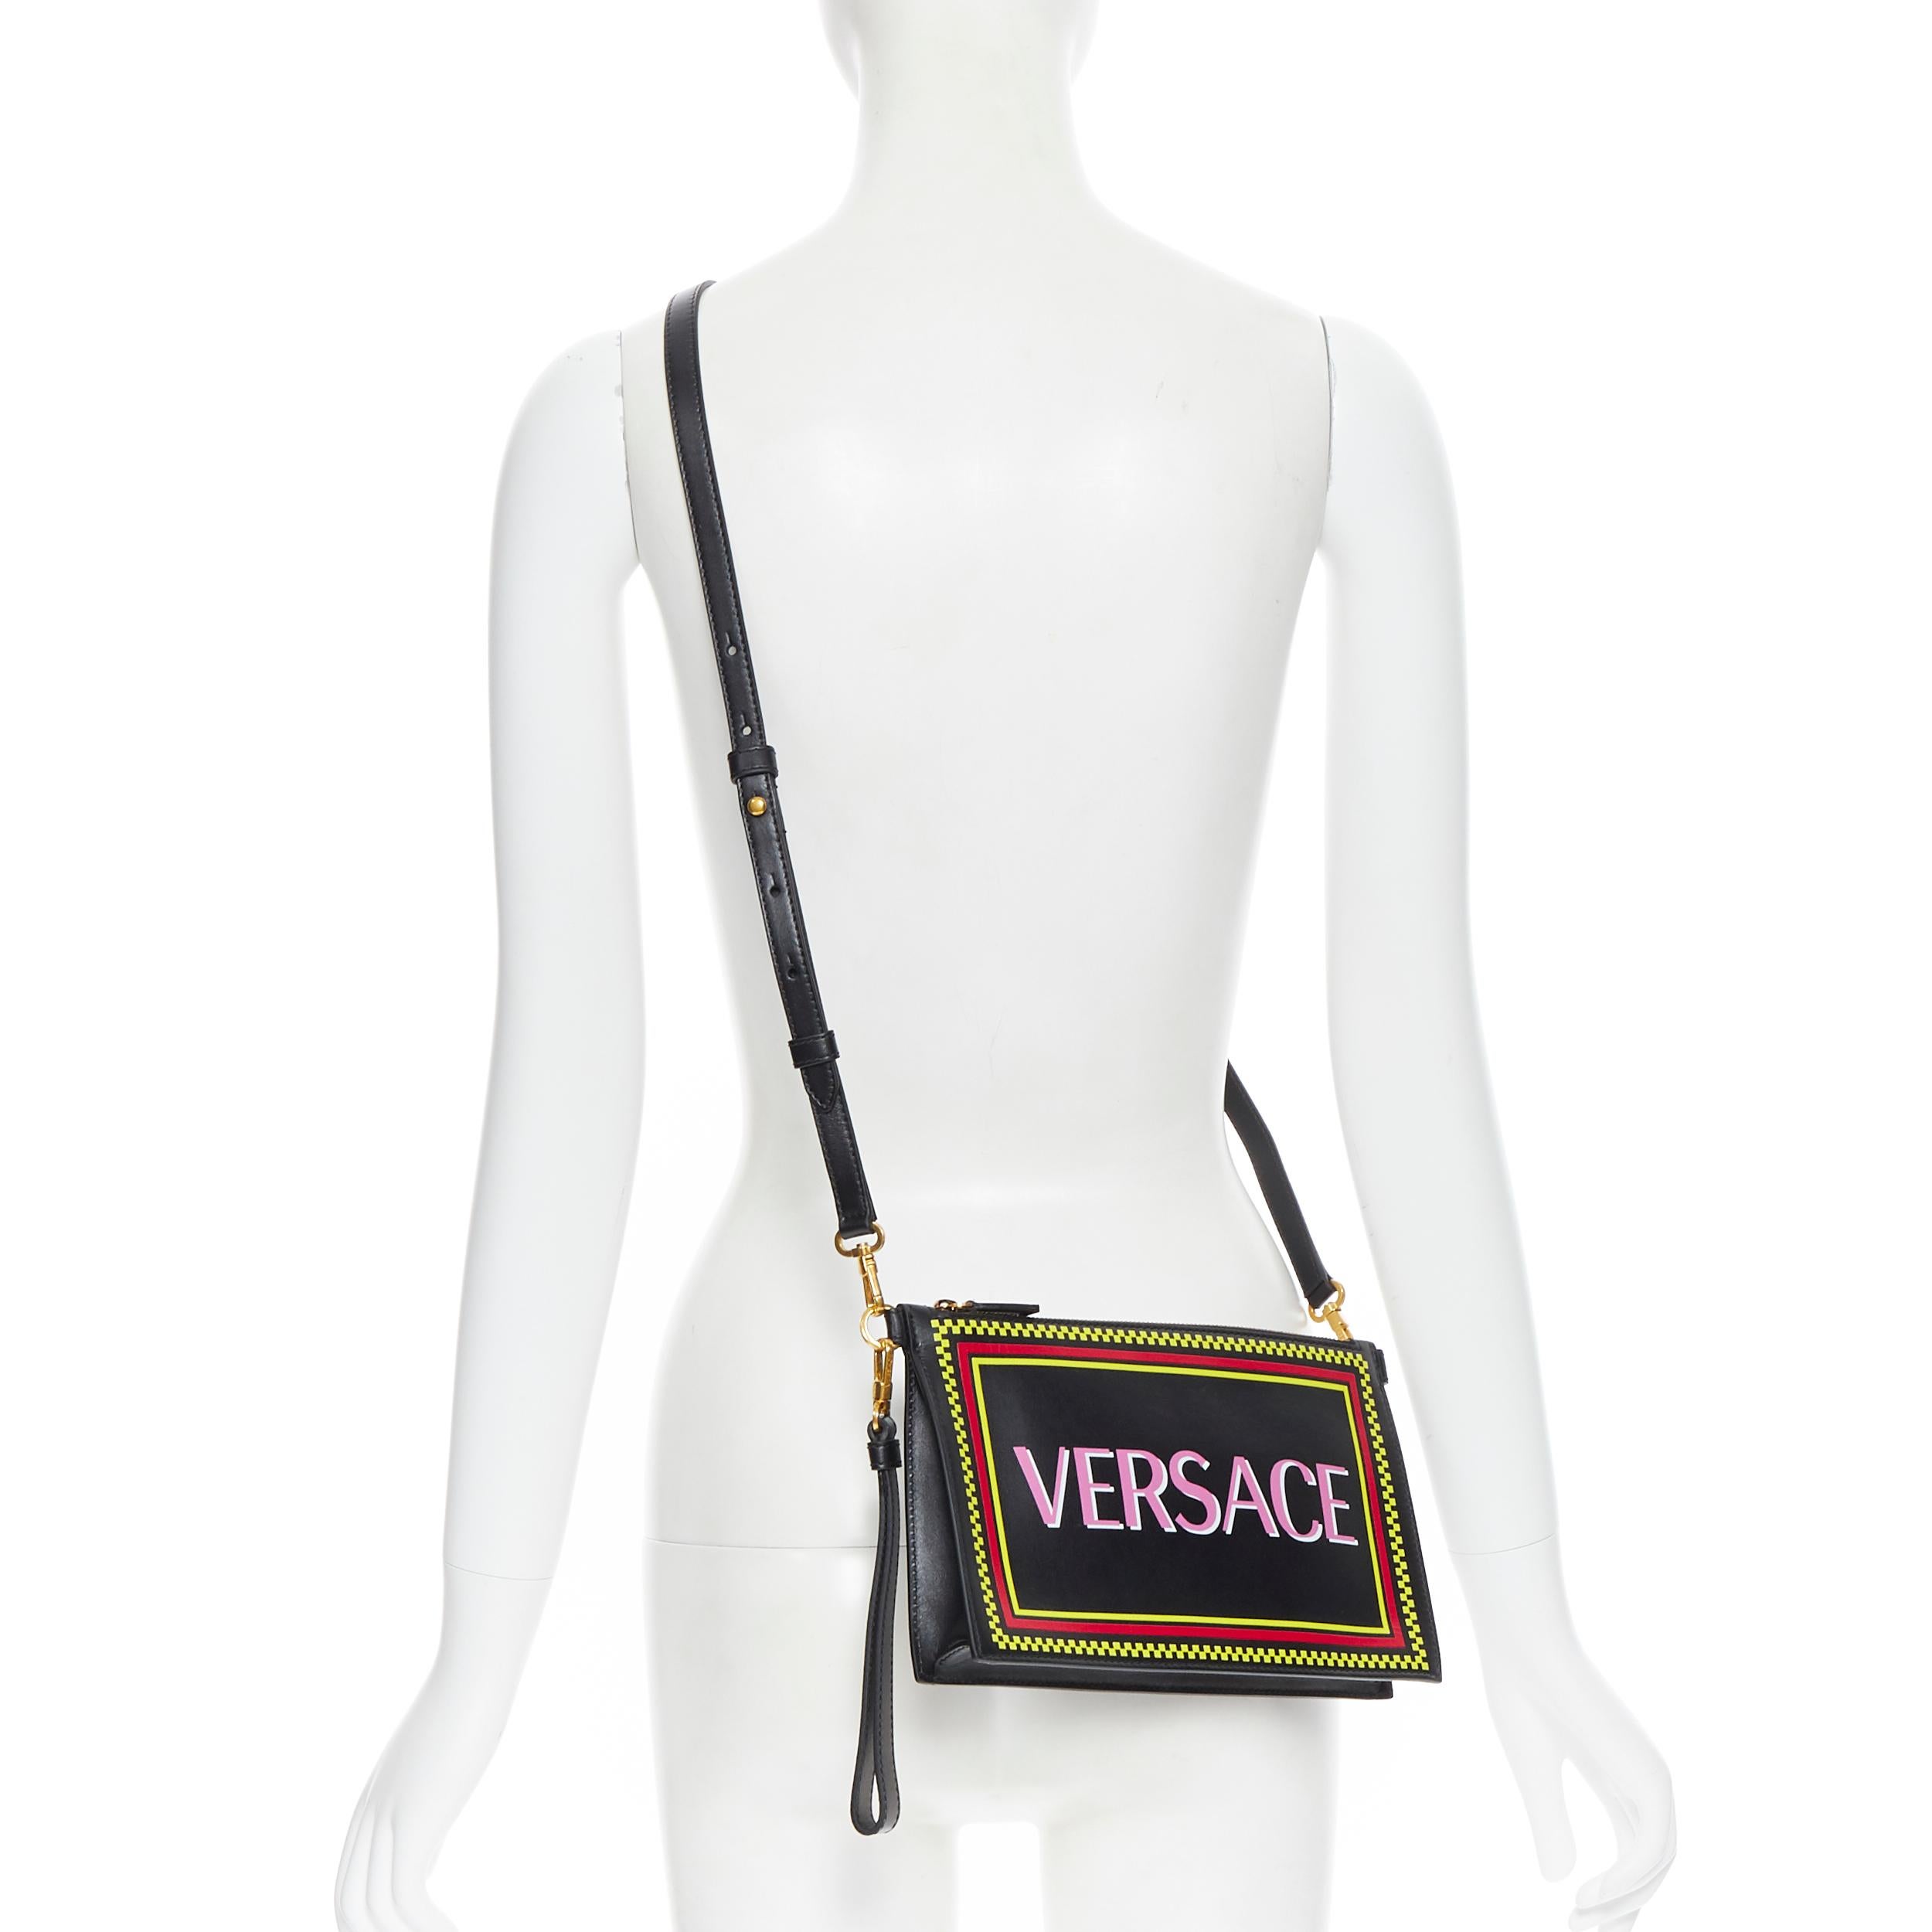 new VERSACE 90's logo print black leather top zip clutch crossbody strap bag
Brand: Versace
Designer: Donatella Versace
Collection: 2020
Model Name / Style: Crossbody clutch
Material: Leather
Color: Black
Pattern: Solid
Extra Detail: 90's logo print